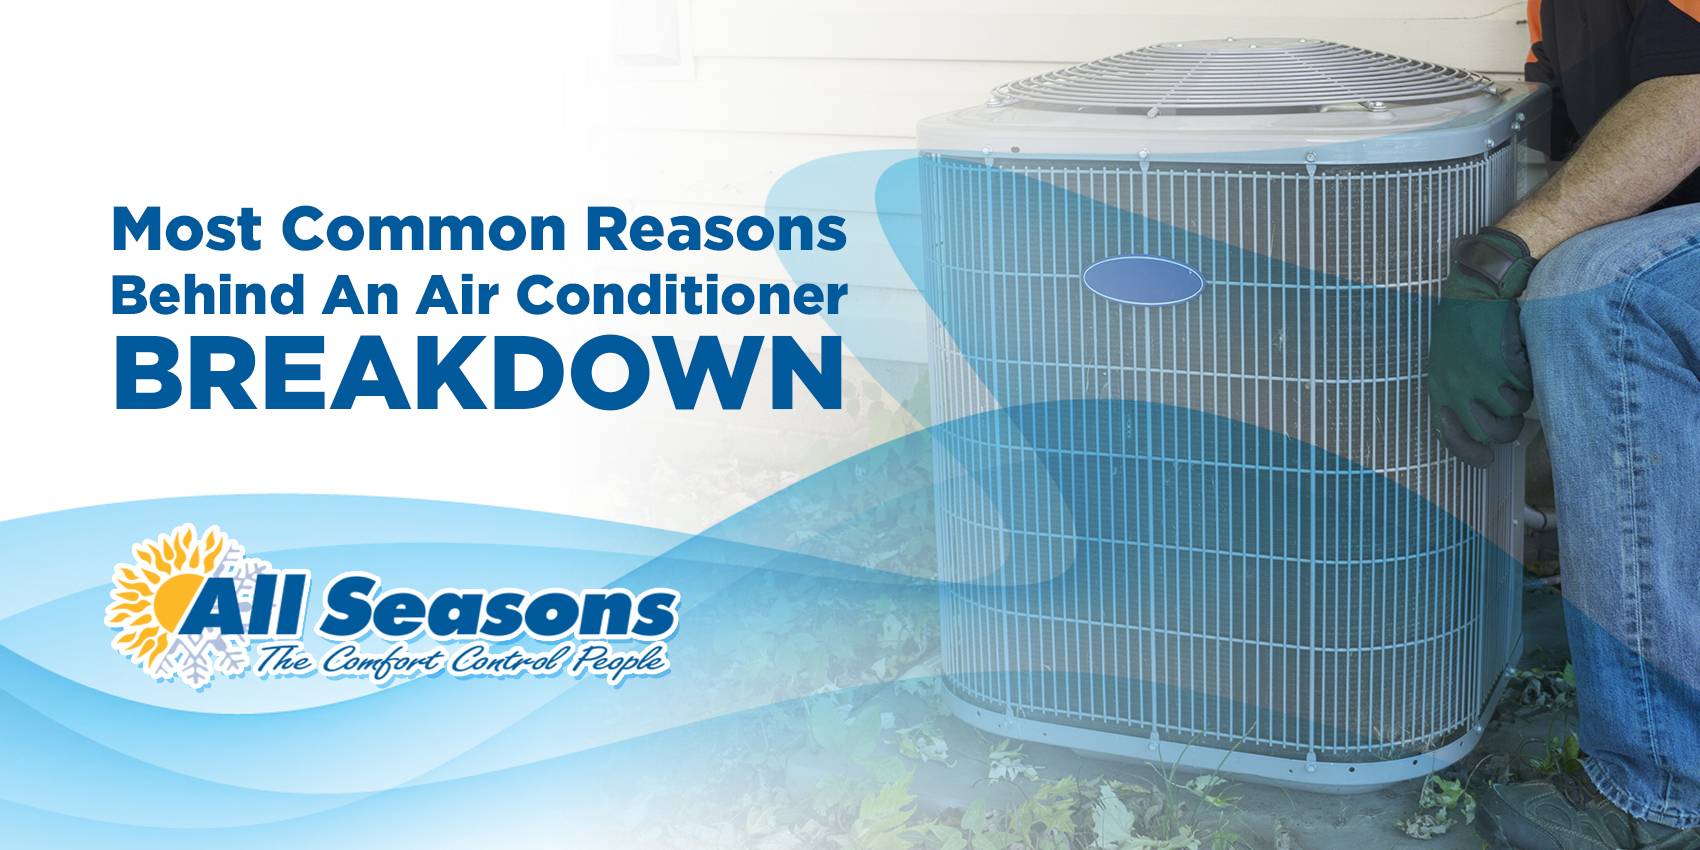 Most Common Reasons Behind An Air Conditioner Breakdown